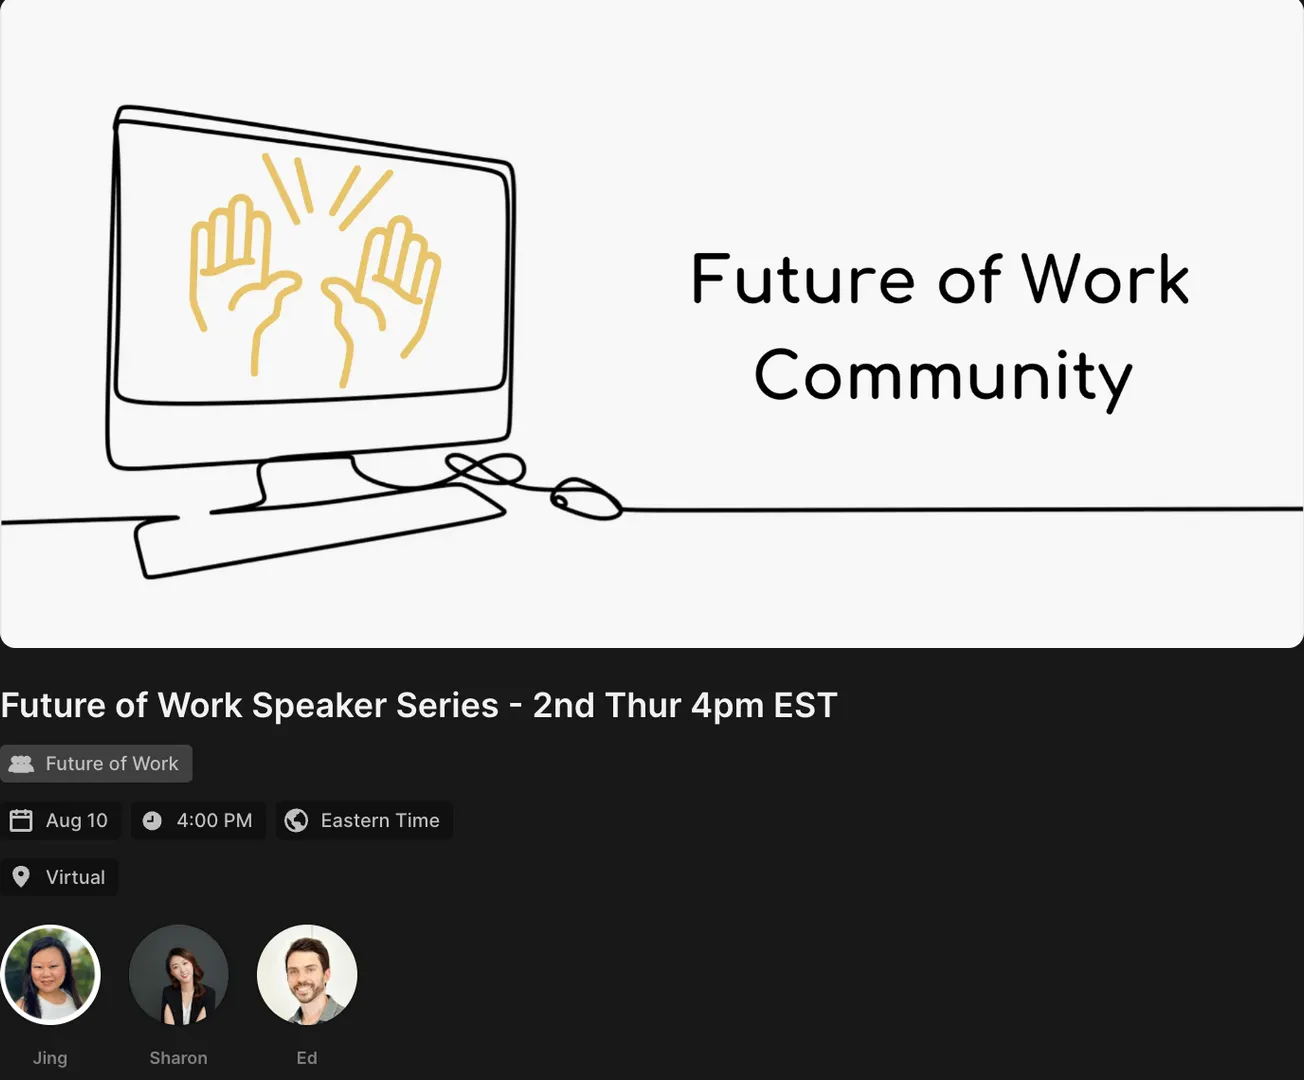 Our Future of Work Community is talking about neurodiversity tomorrow Thur 8/10 at 4pm-4:30pm EST. Sharon Gai will host a fireside chat with Ed Thompson, author of A Hidden Force, learn more and RSVP here:
https://joinentre.com/event/6407ec21155355001710d8e8

Join our community at entre.link/fow to connect with others passionate about the future of work!  